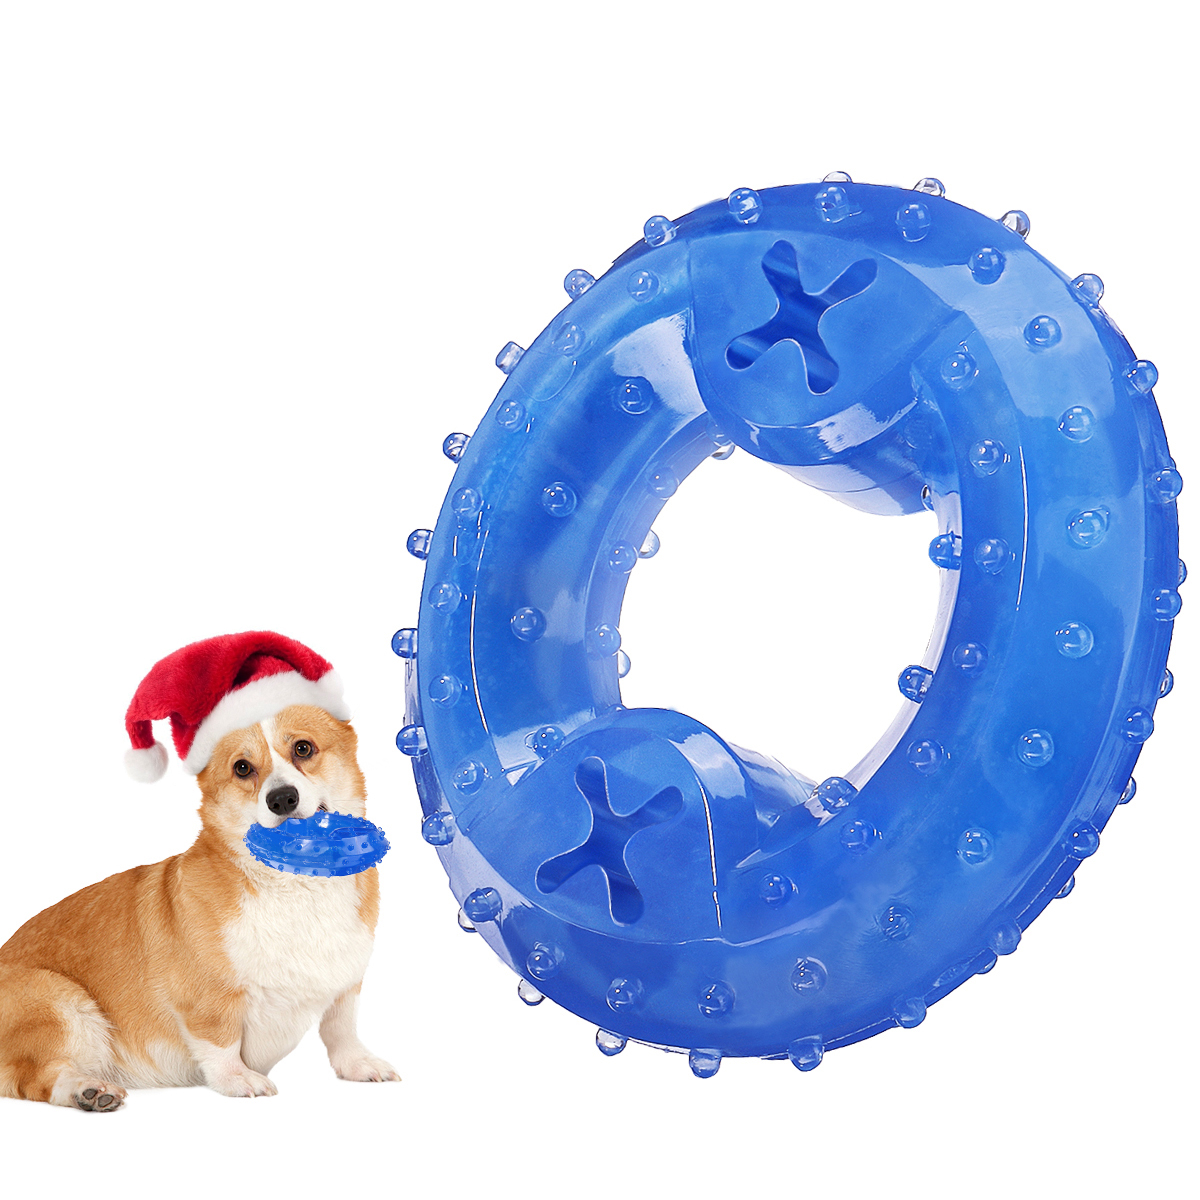 Teething Toys For Puppies That Freeze